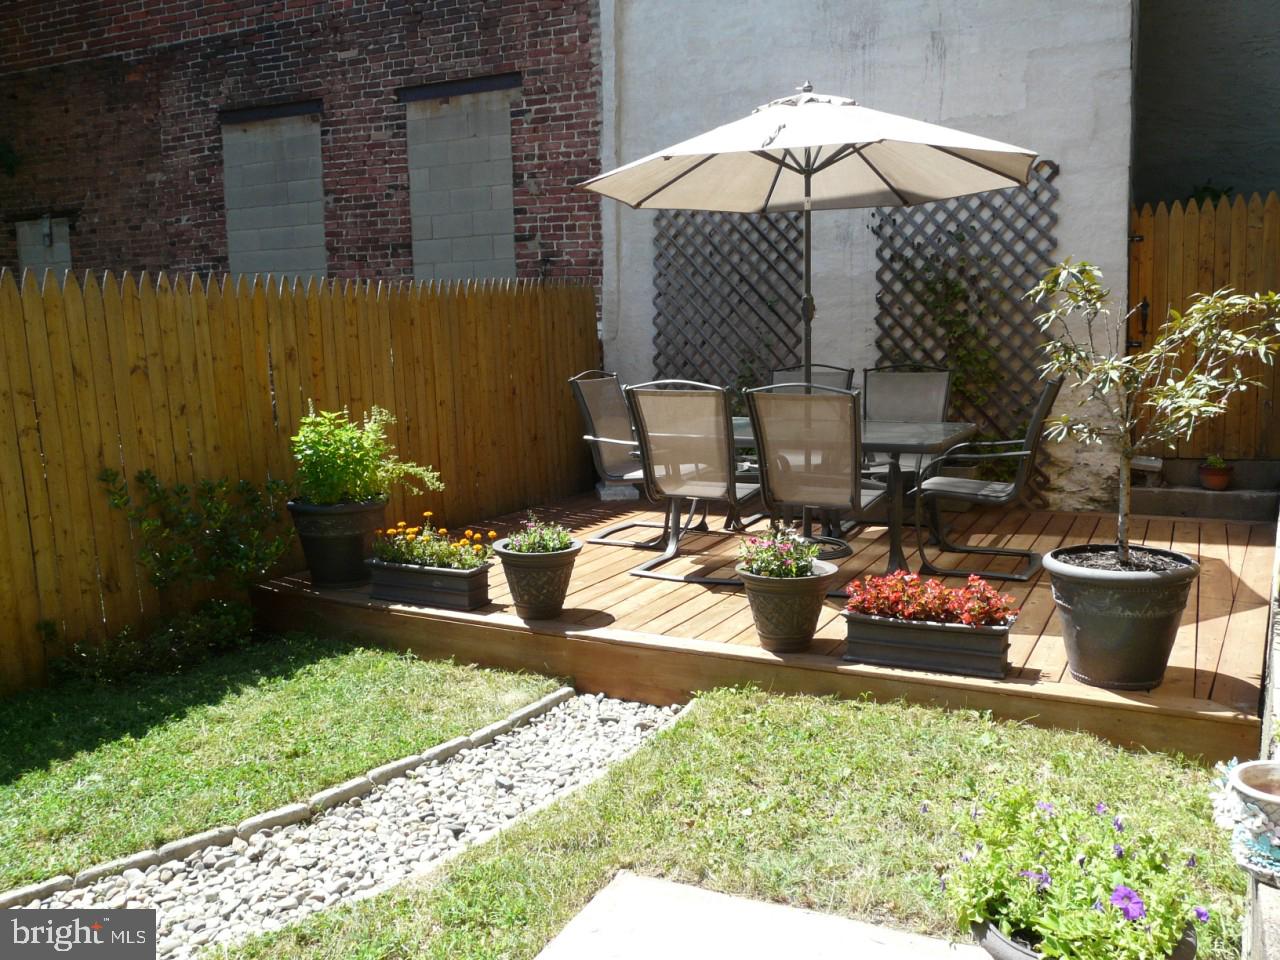 a view of a backyard with plants and patio